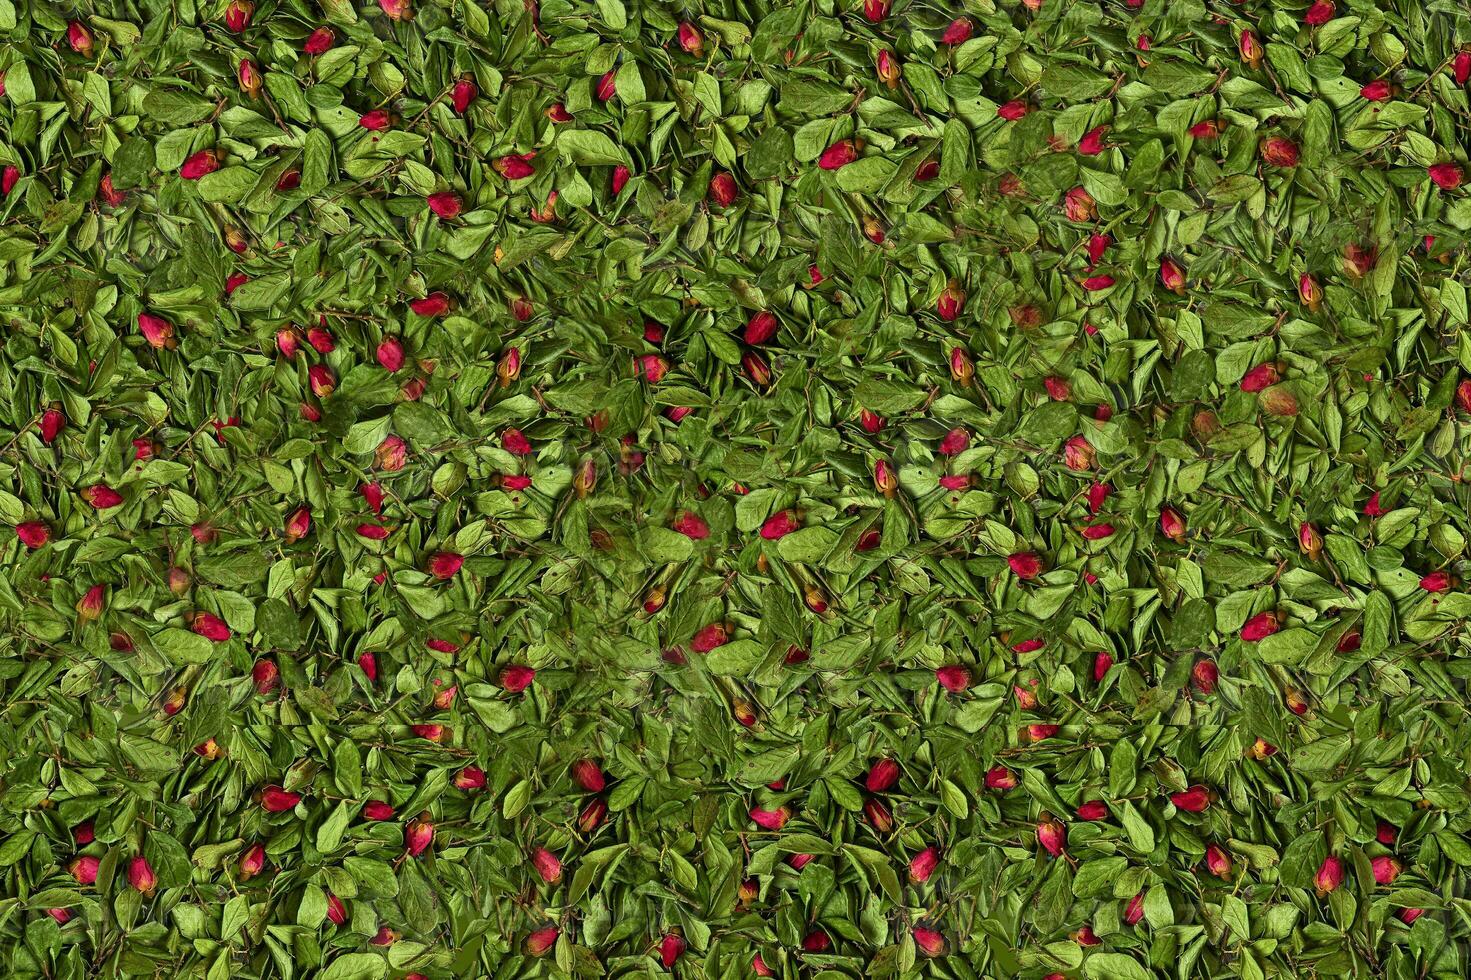 Wallpaper or background of red dried rose buds among green leaves and twigs. Nature and plants. Top view photo